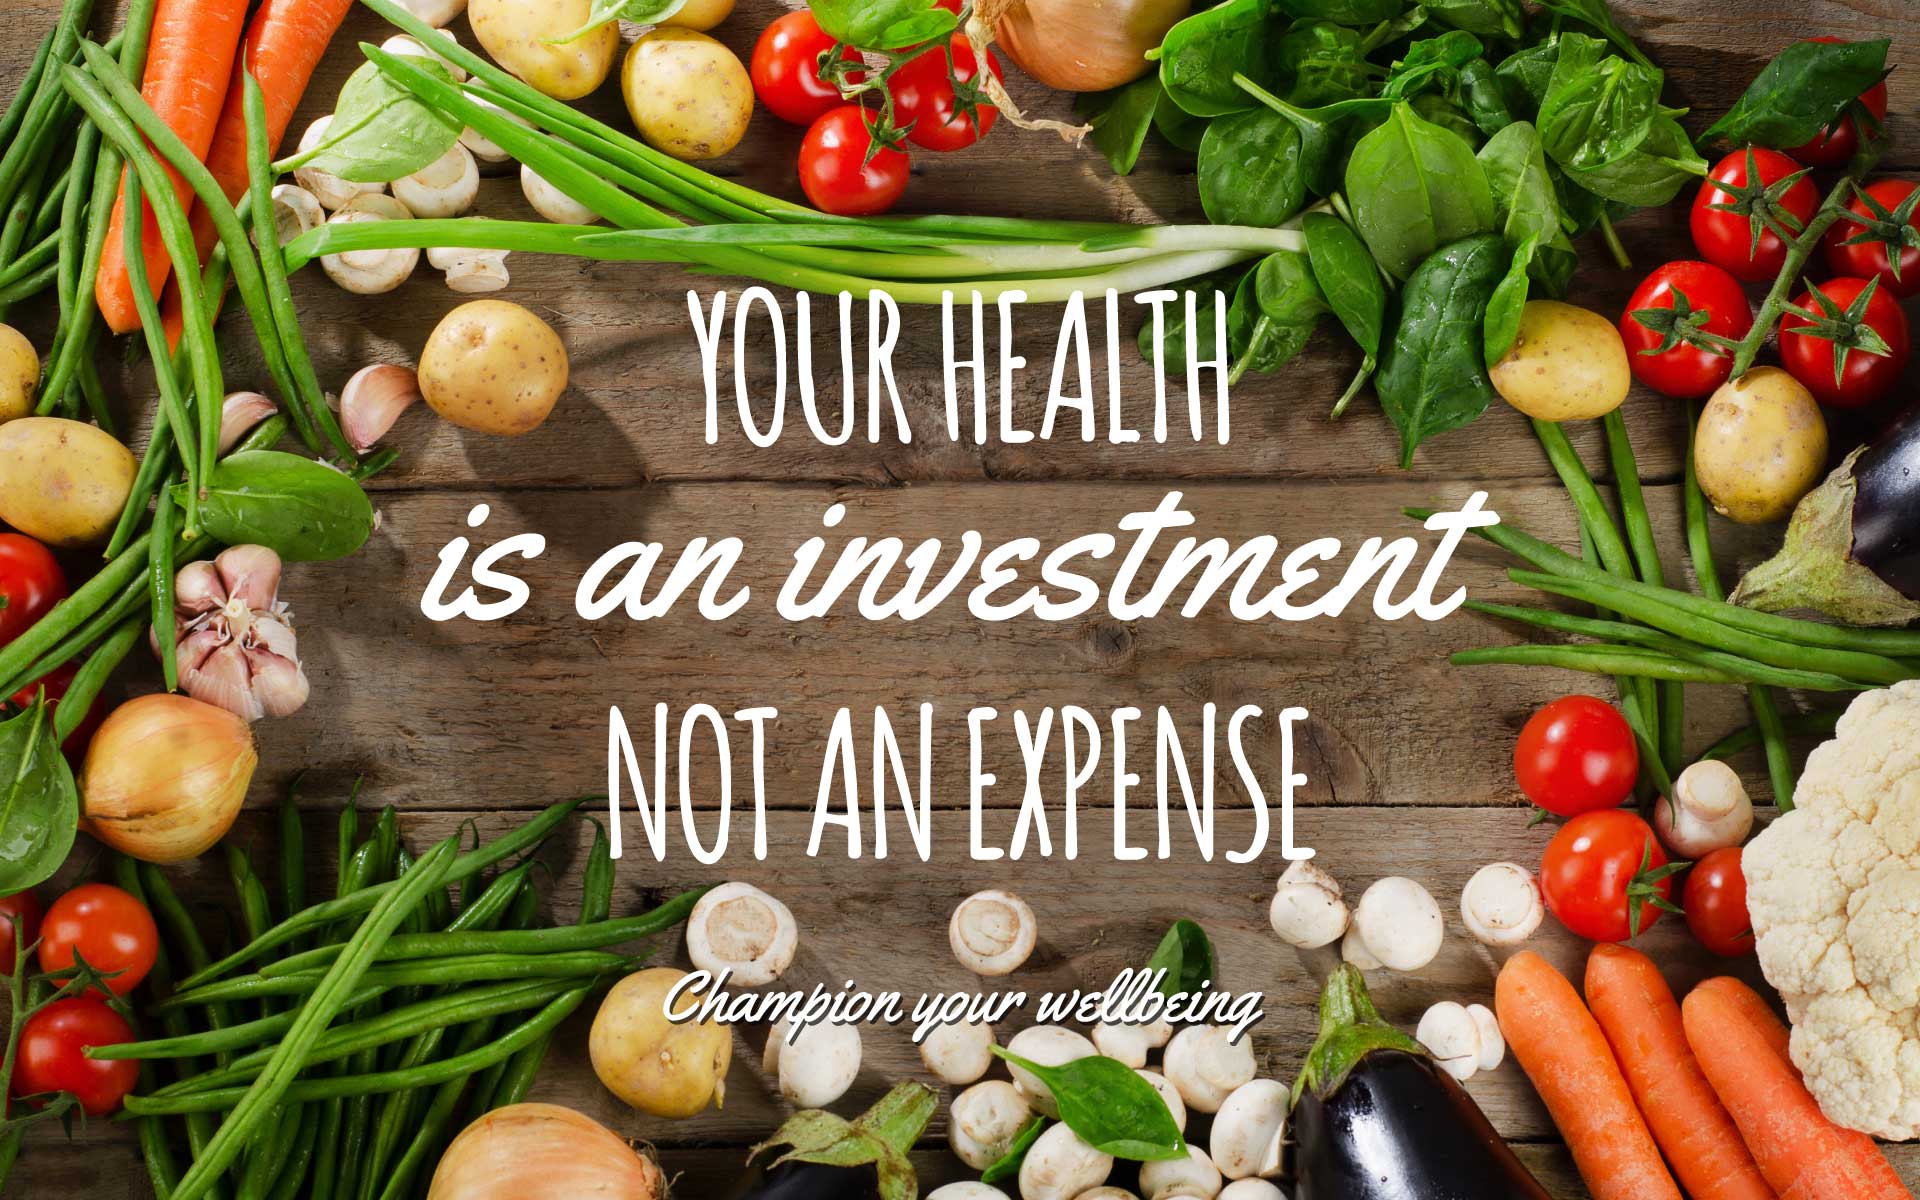 Your health is an investment